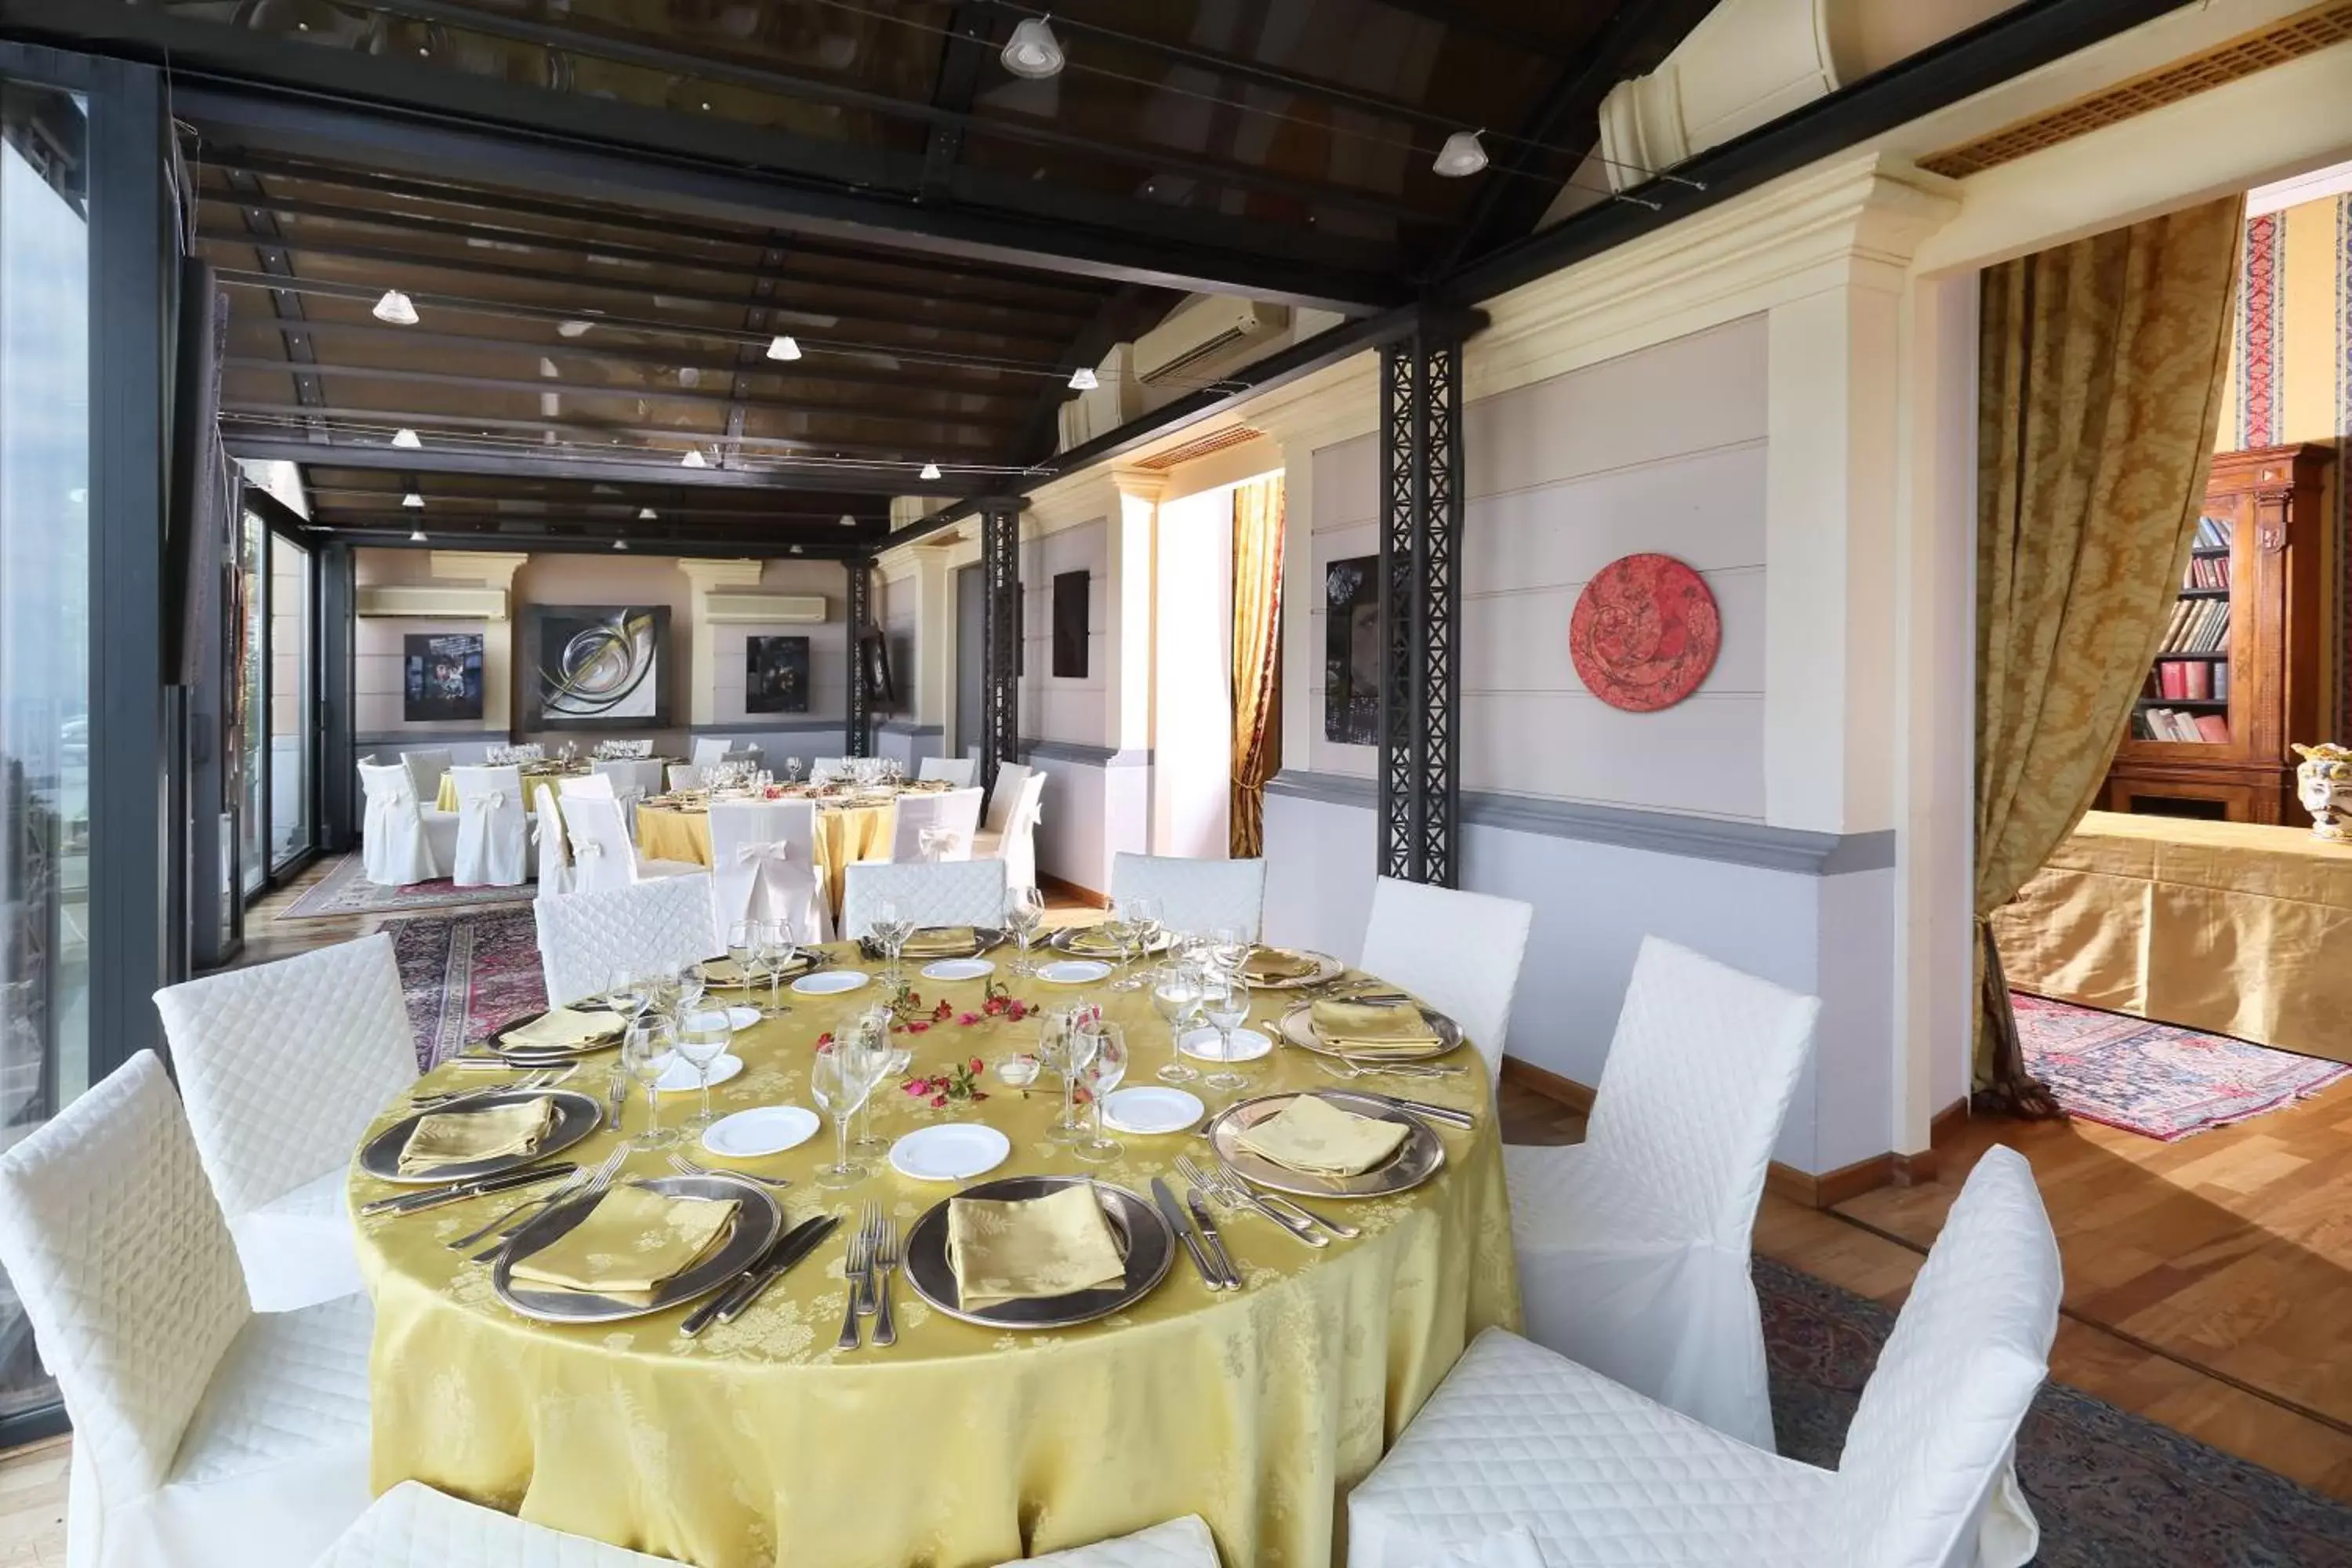 Banquet Facilities in Excelsior Palace Hotel